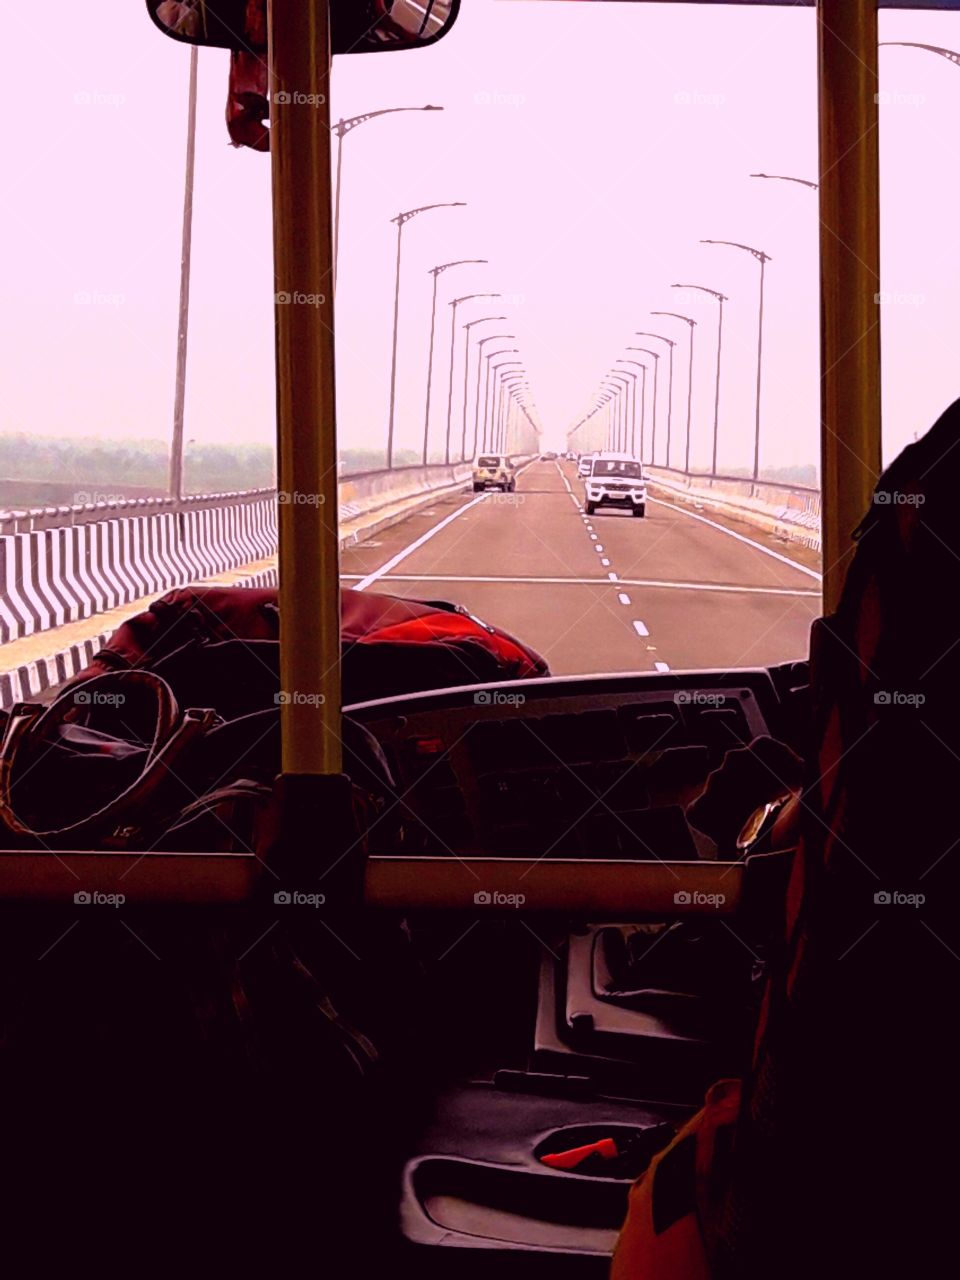 Assam ,Bogibil brige, on the brige runing car.Shoted pic from under the bus in traveling time.